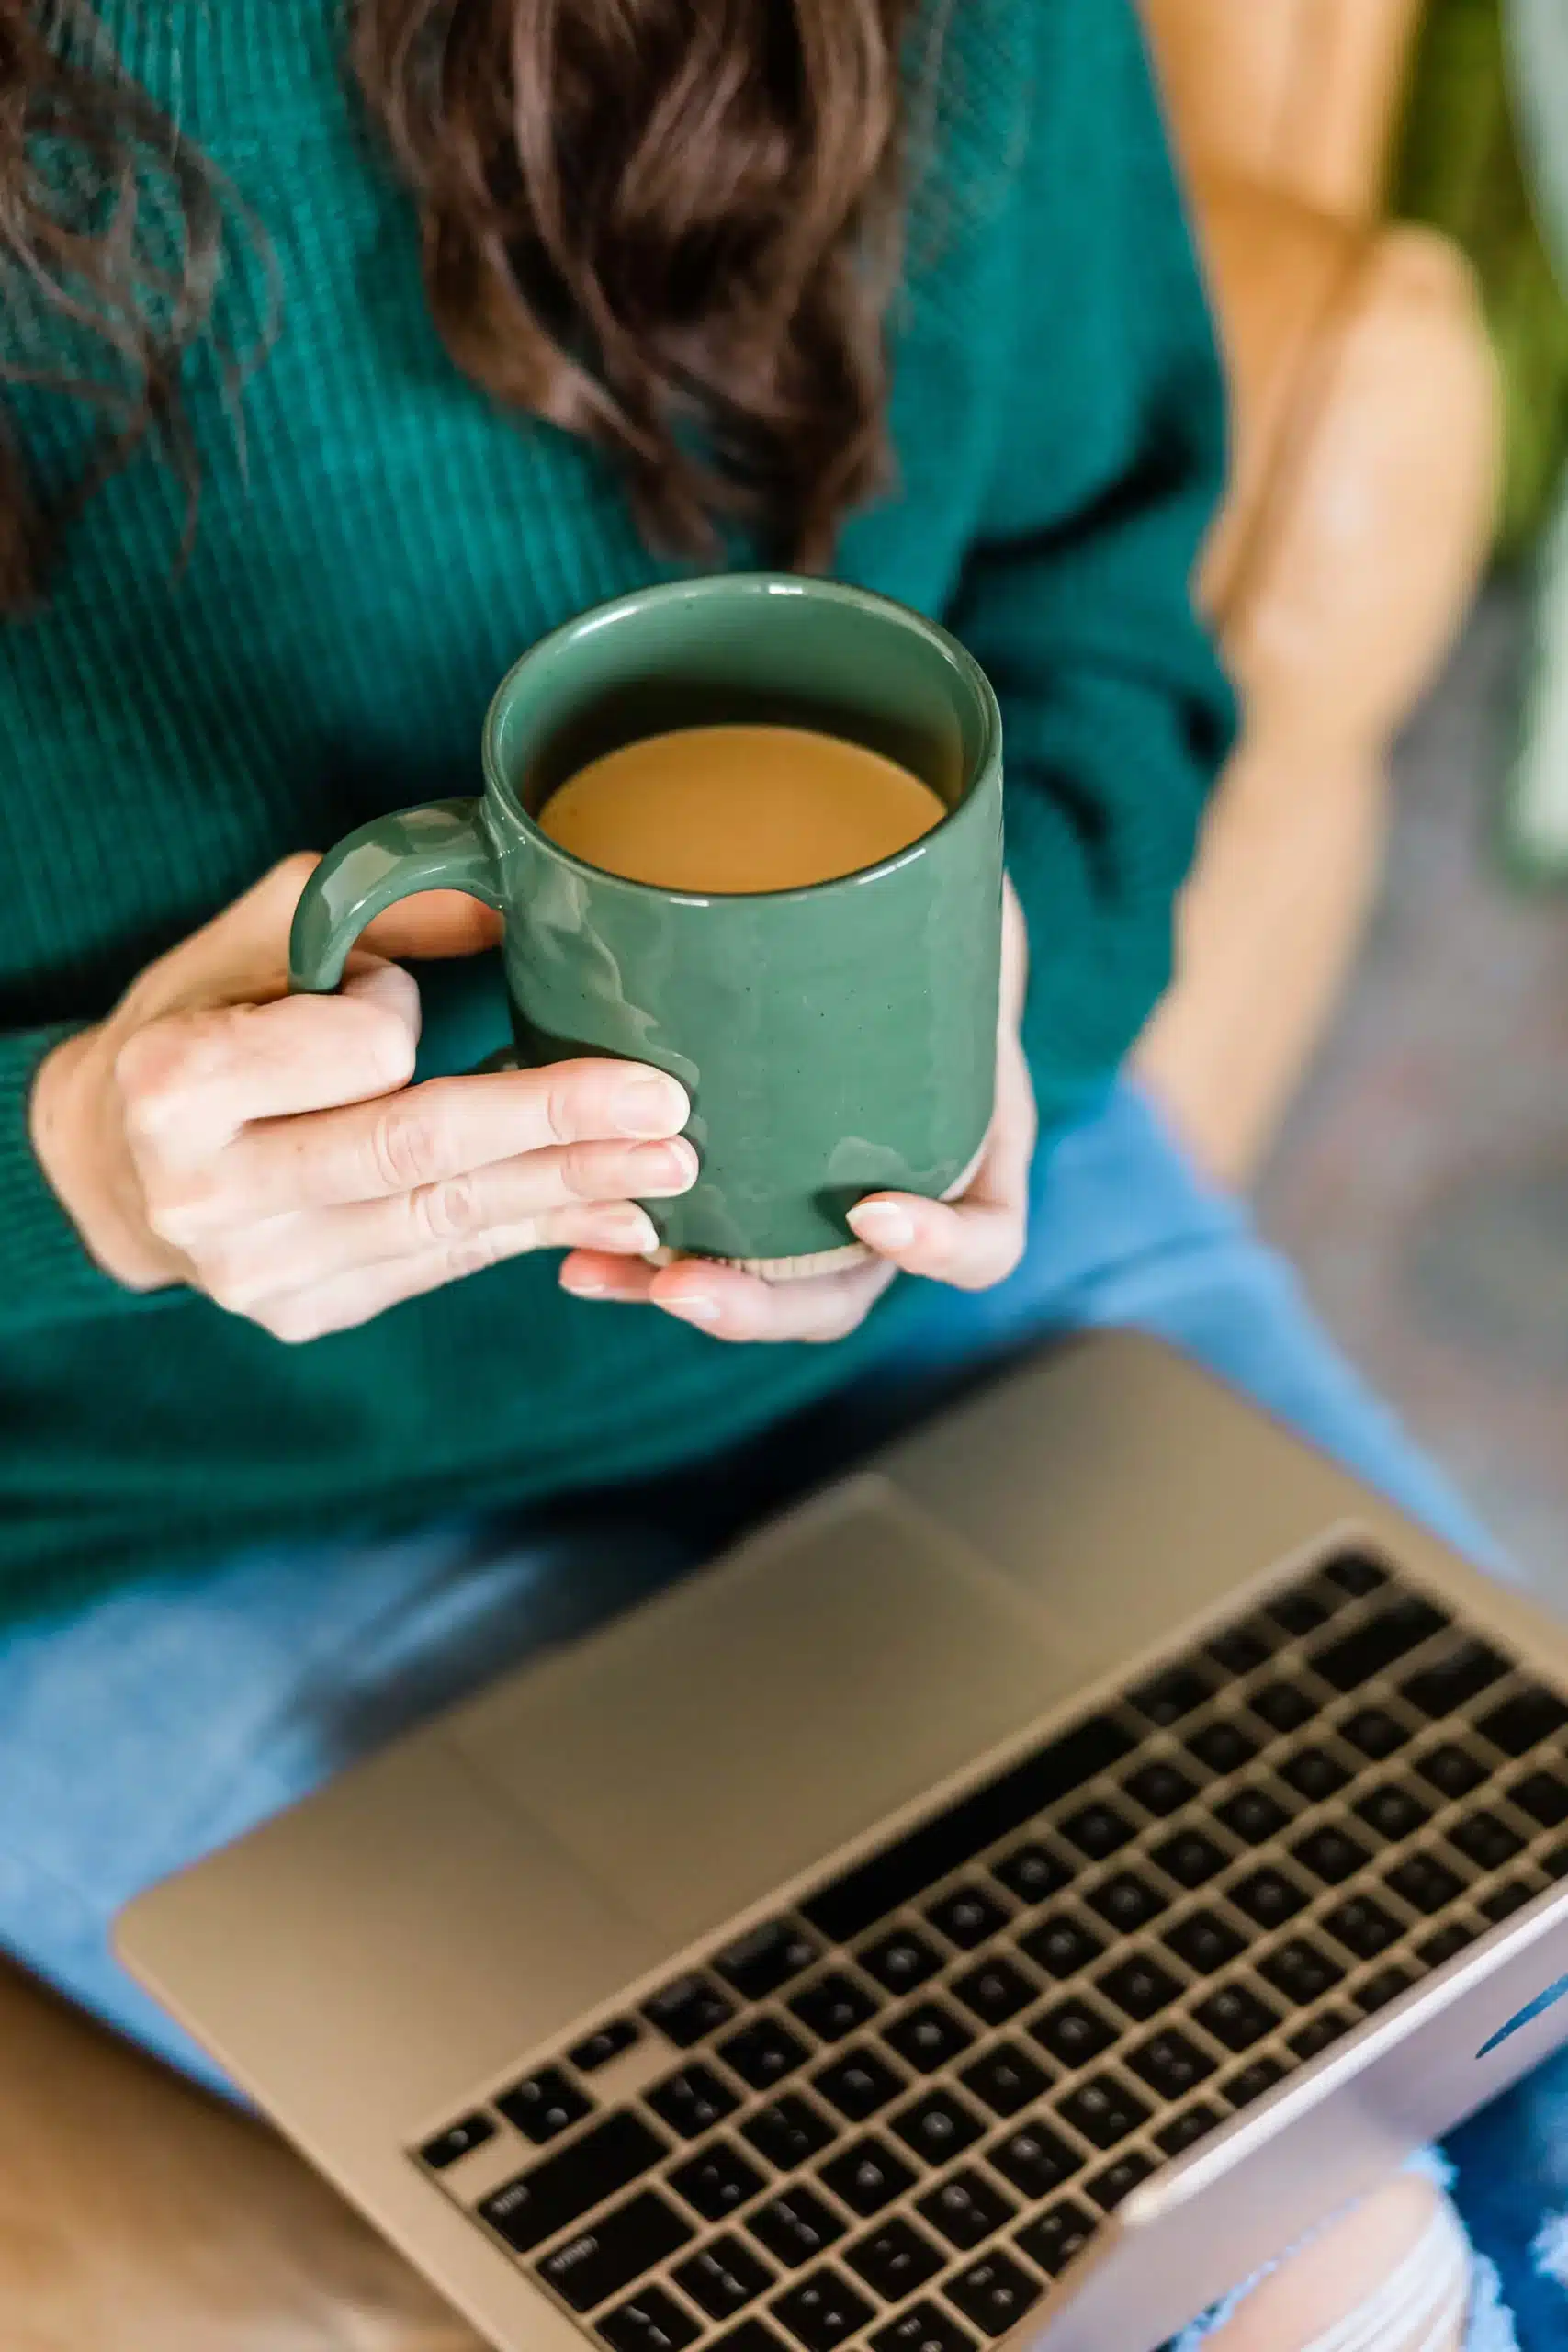 A person seated with a laptop on their lap holding a green mug with a beverage, wearing a green sweater, with only their torso and arms visible.